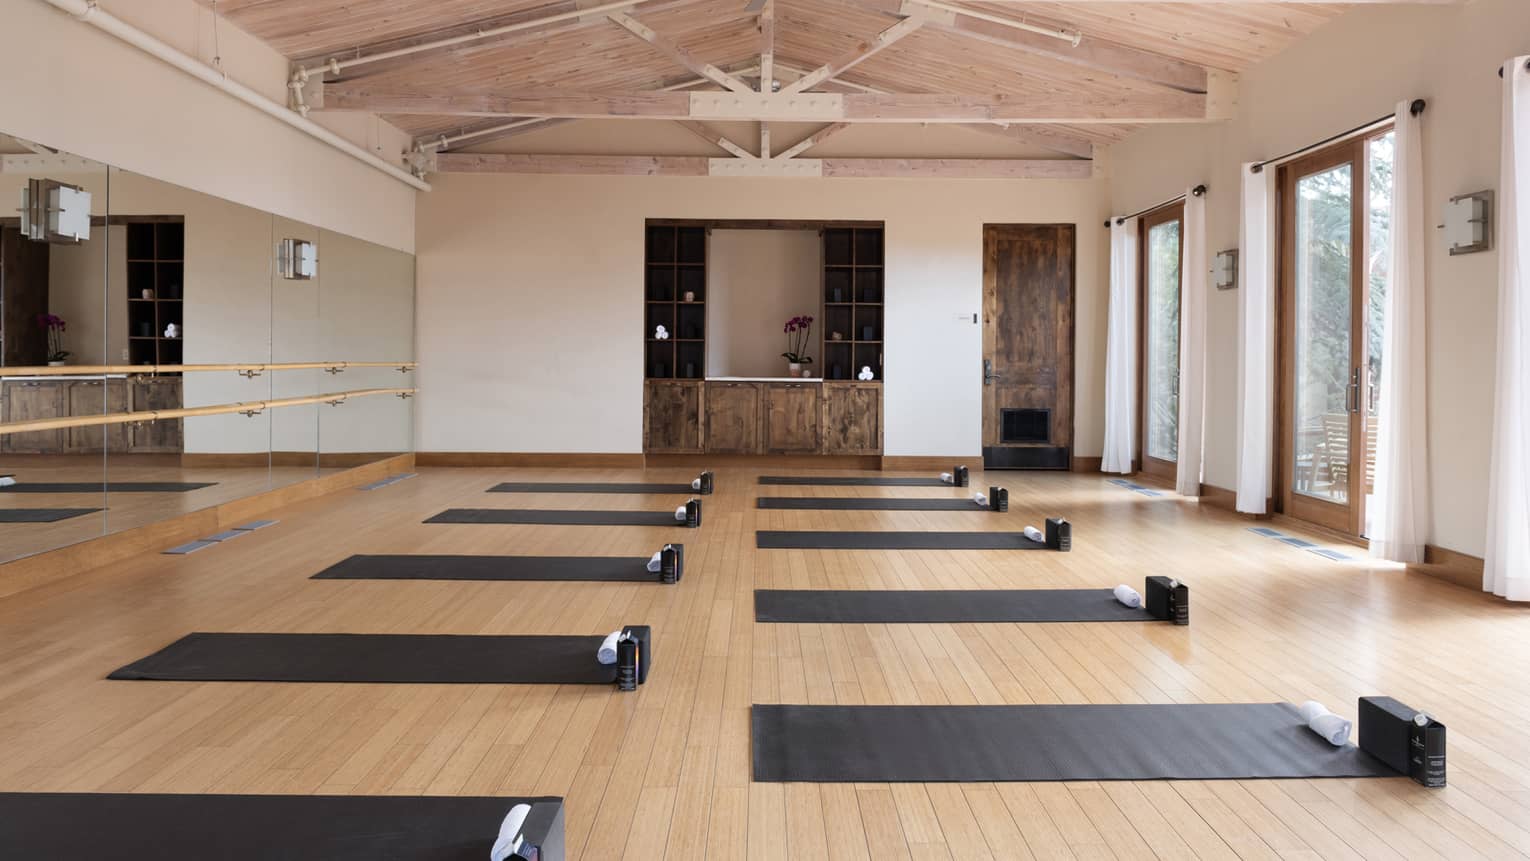 Interior of yoga studio with open rafter ceilings, one mirrored wall and wood floors with two rows of black yoga mats set out on the floor